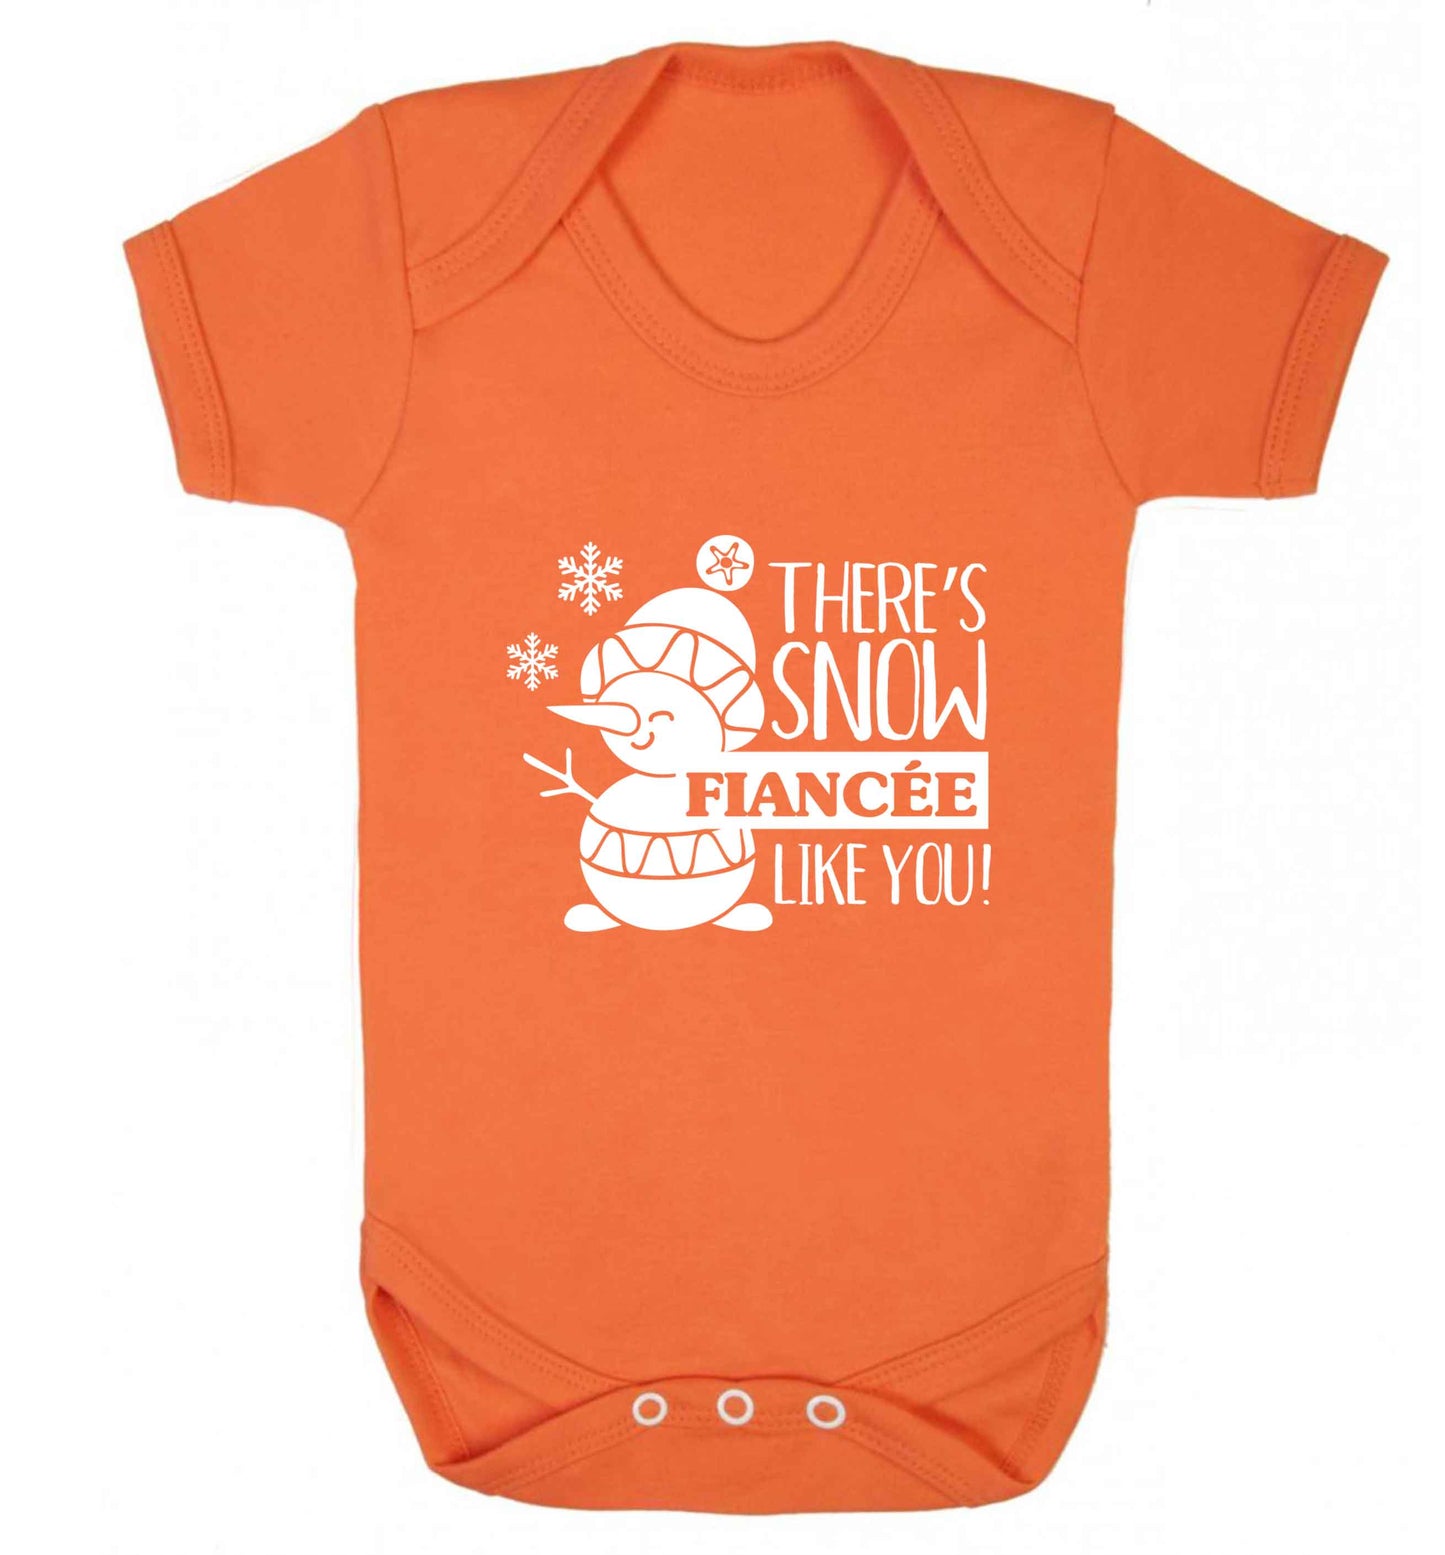 There's snow fiancee like you baby vest orange 18-24 months